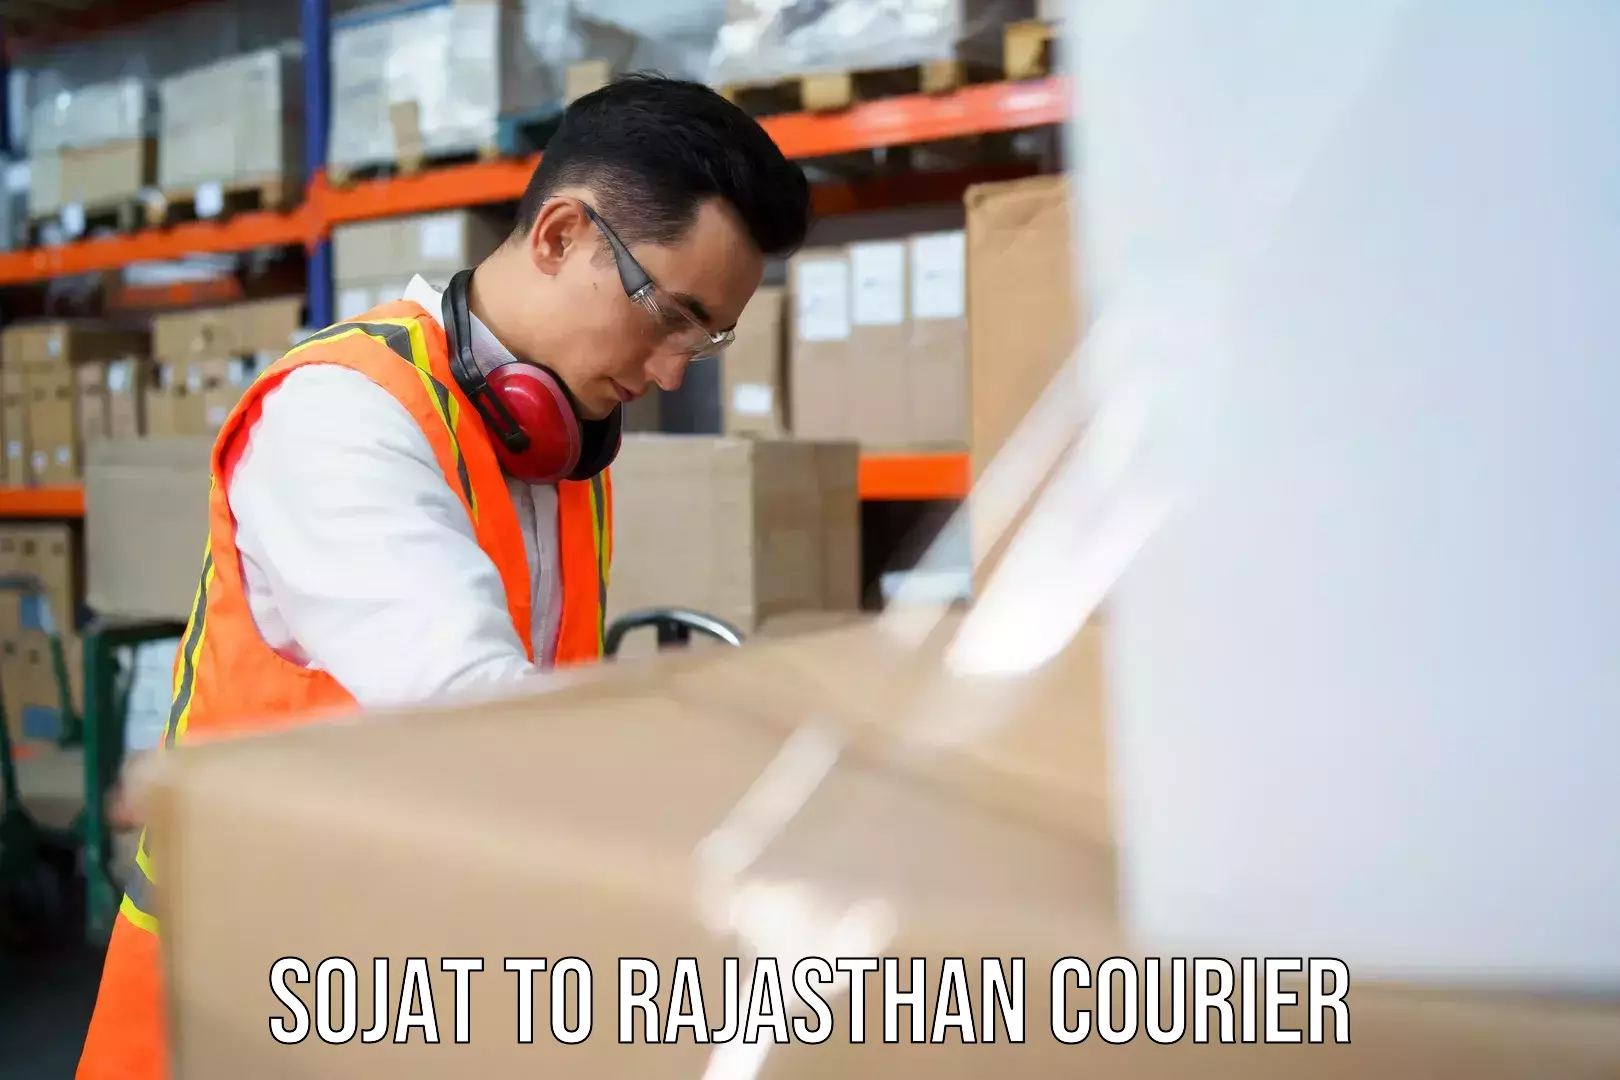 Global shipping solutions Sojat to Rajasthan